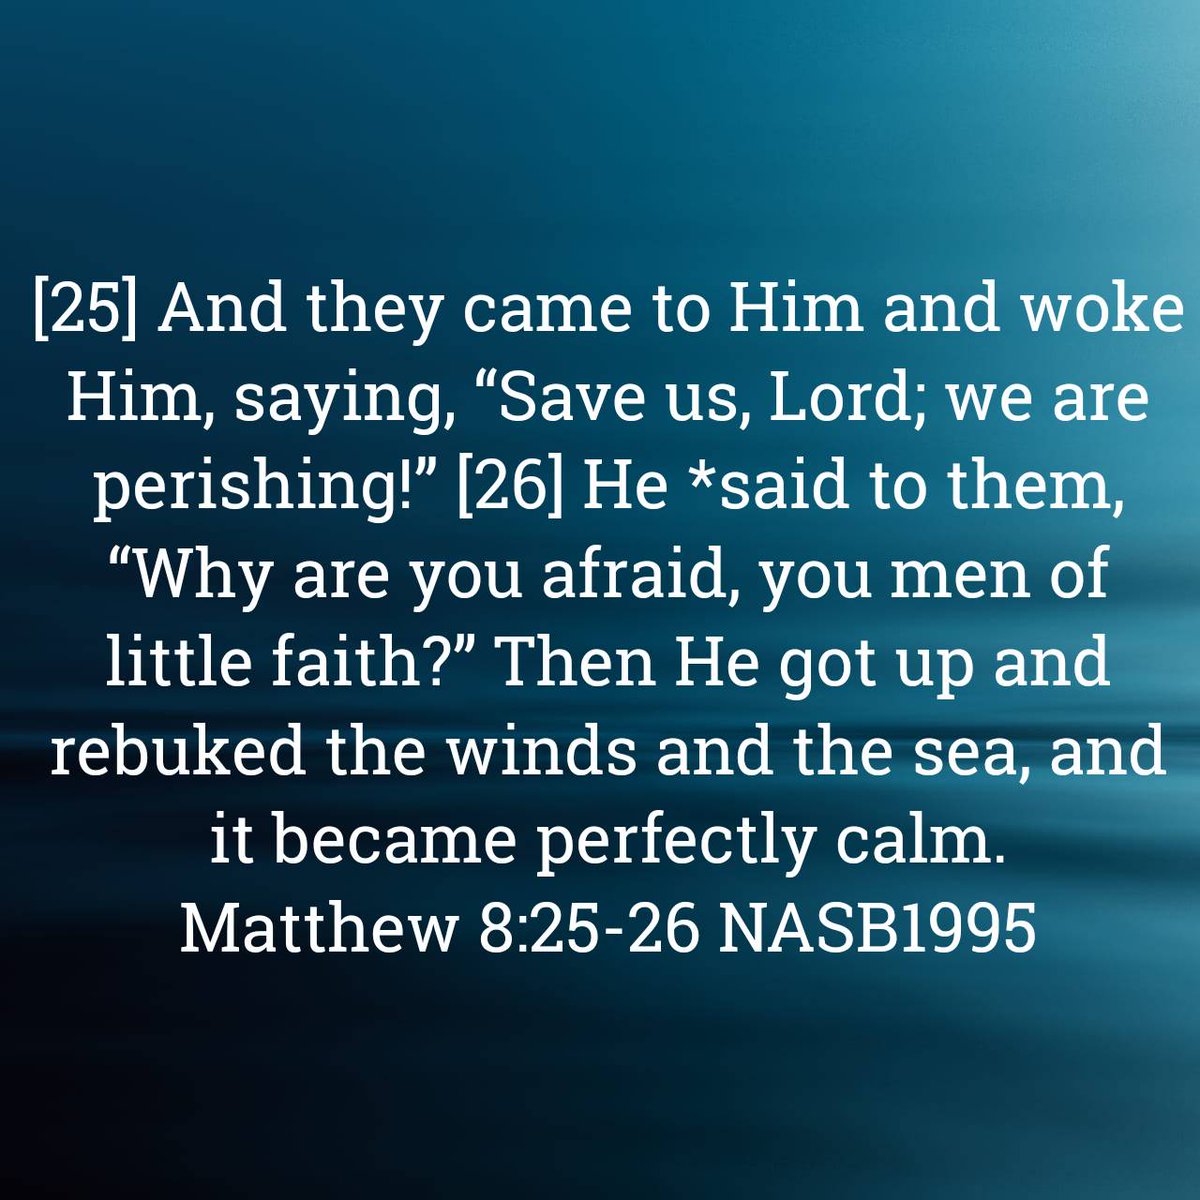 And they came to Him and woke Him, saying, “Save us, Lord; we are perishing!” [26] He *said to them, “Why are you afraid, you men of little faith?” Then He got up and rebuked the winds and the sea, and it became perfectly calm. Matthew 8:25-26 NASB bible.com/bible/100/mat.…